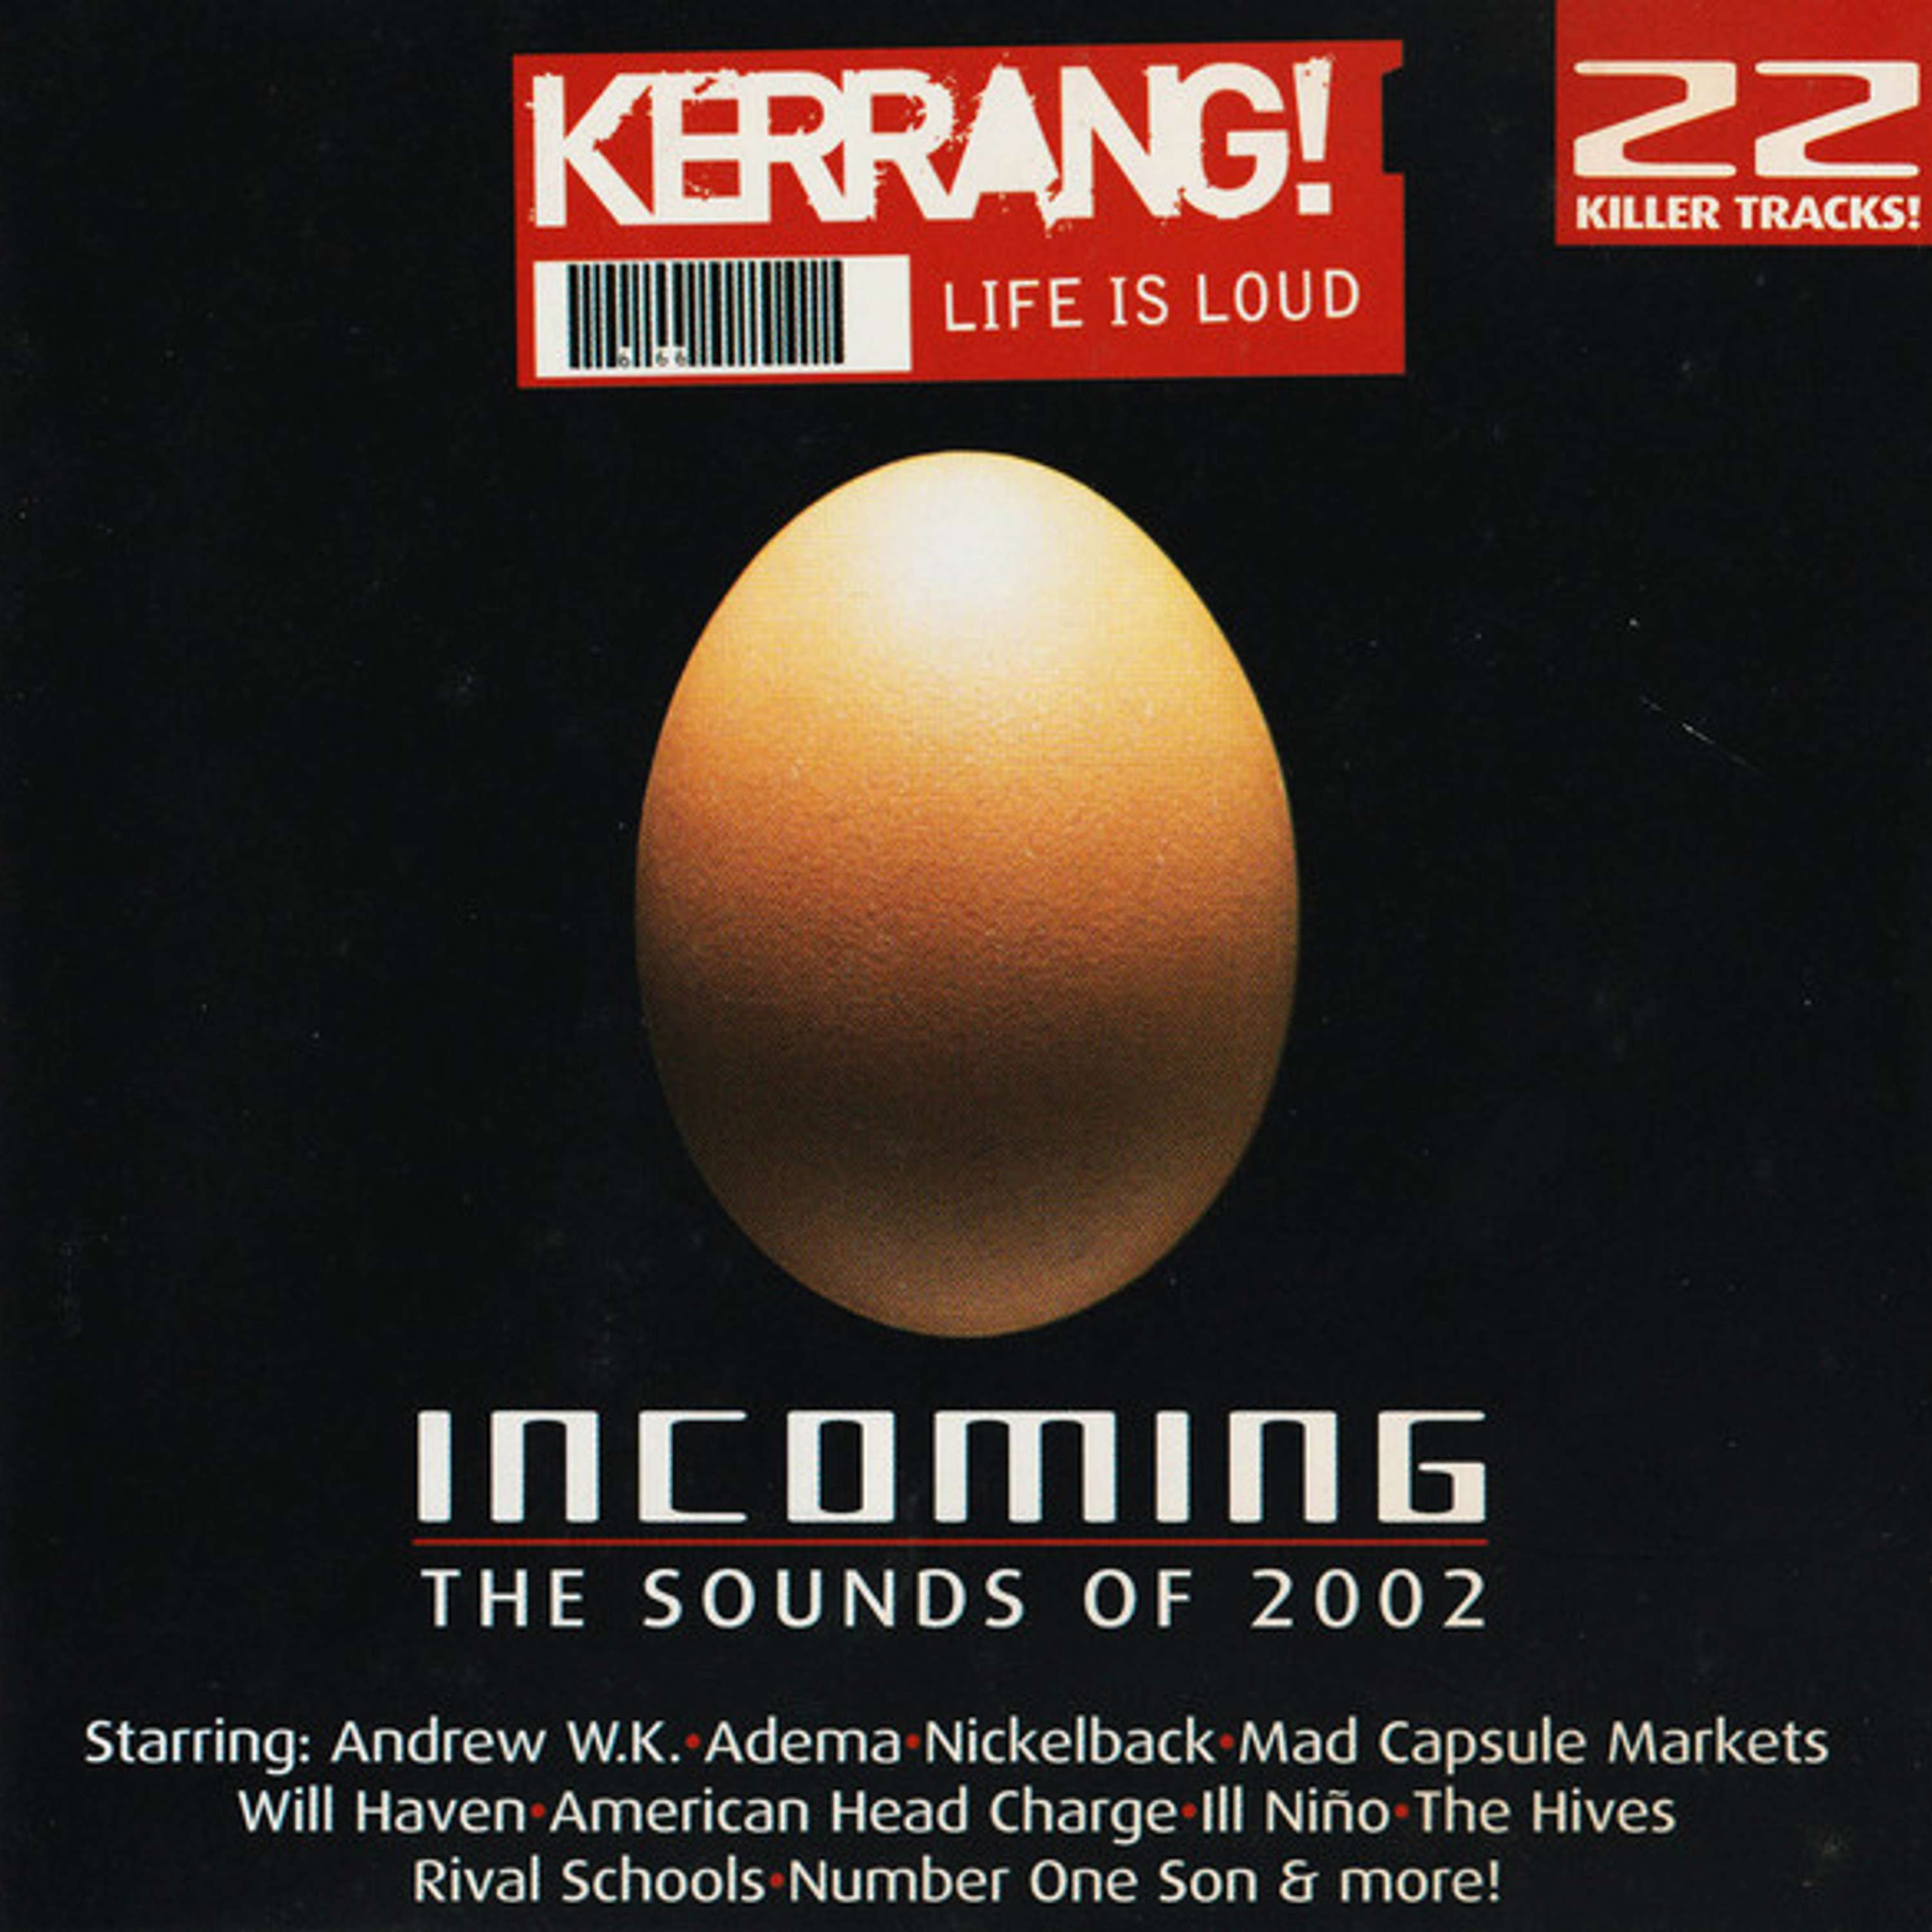 Free With This Months Issue 65 - Carl Bryan selects Kerrang Incoming - The Sounds of 2002